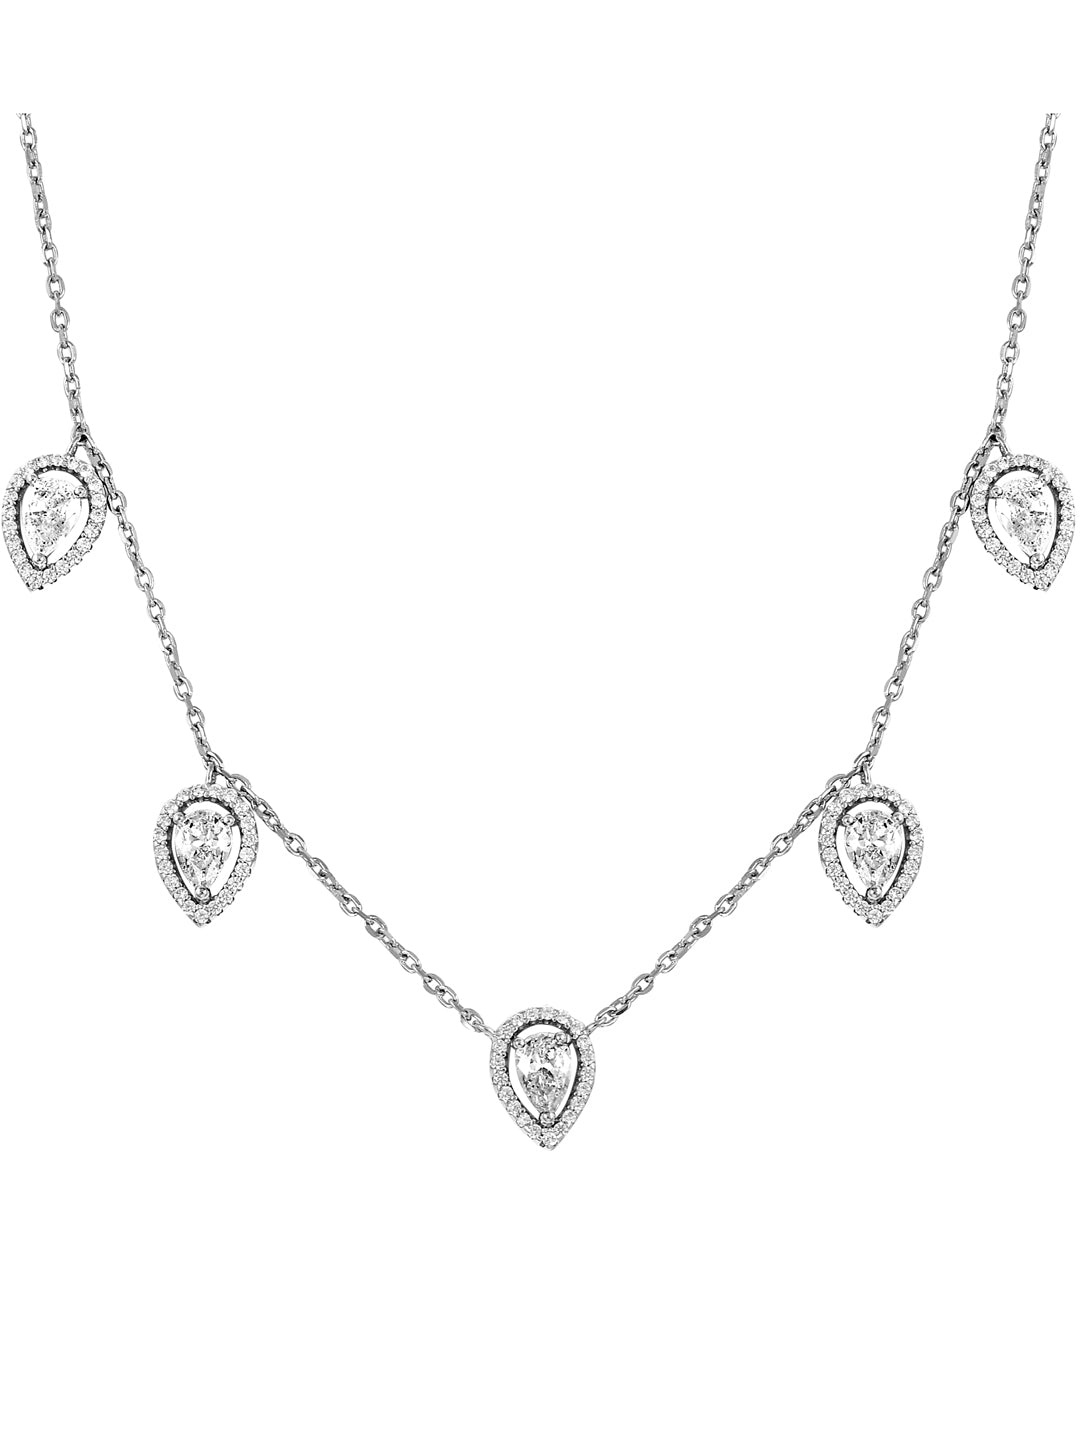 Pure Silver Leaflet Necklace Embellished With Cubic Zirconia Stones 